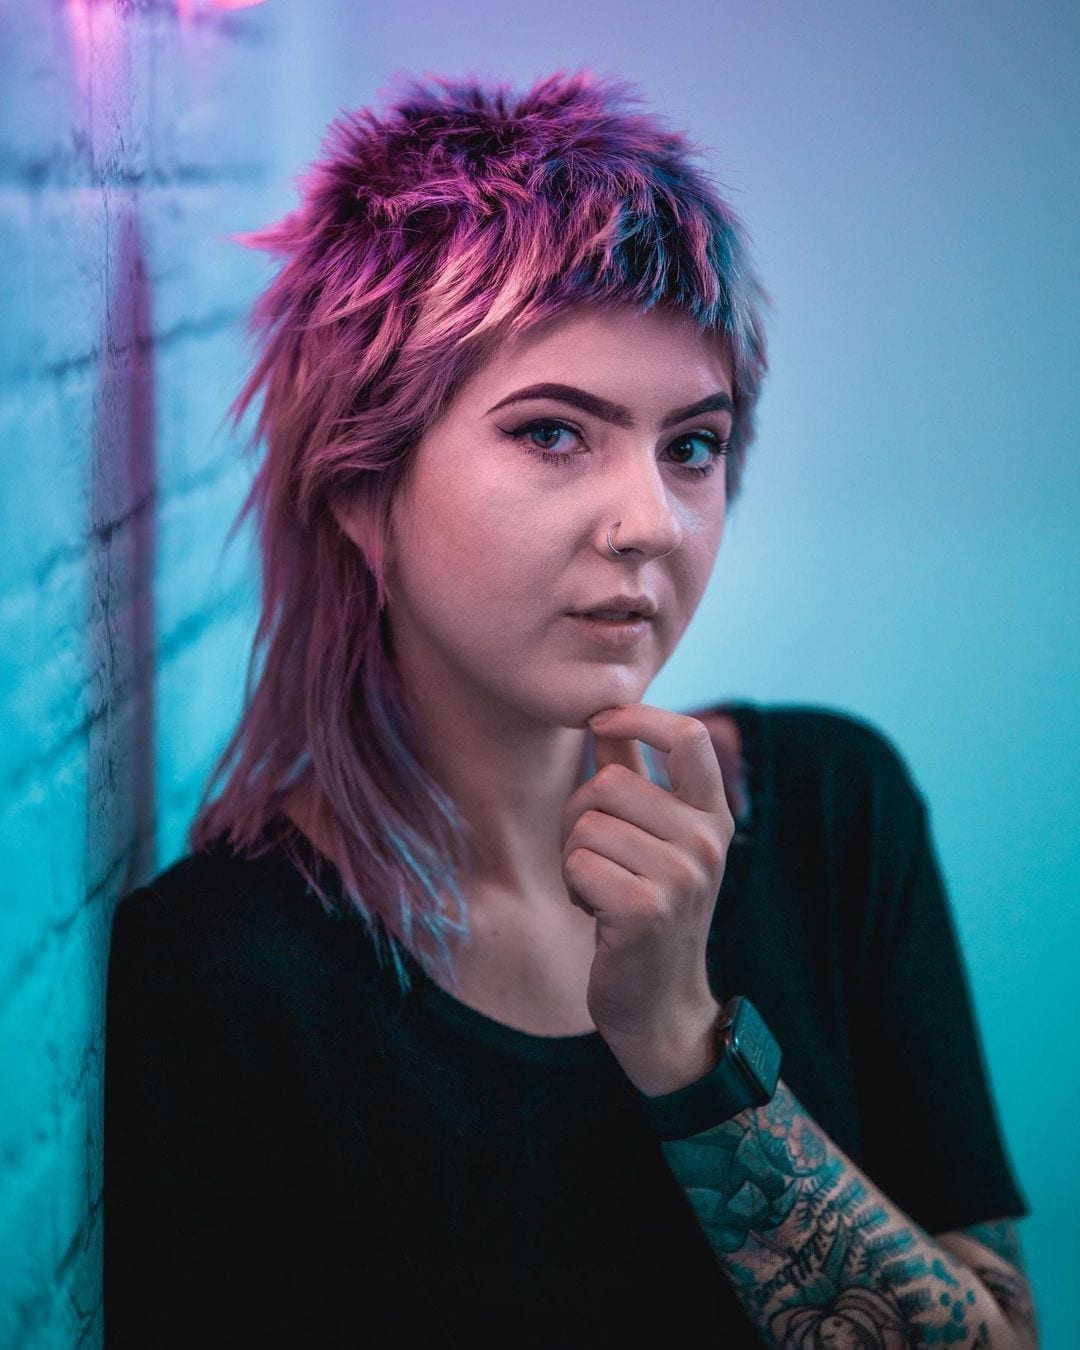 Woman with a mullet that is colored with a faded galaxy haircut holds her chin